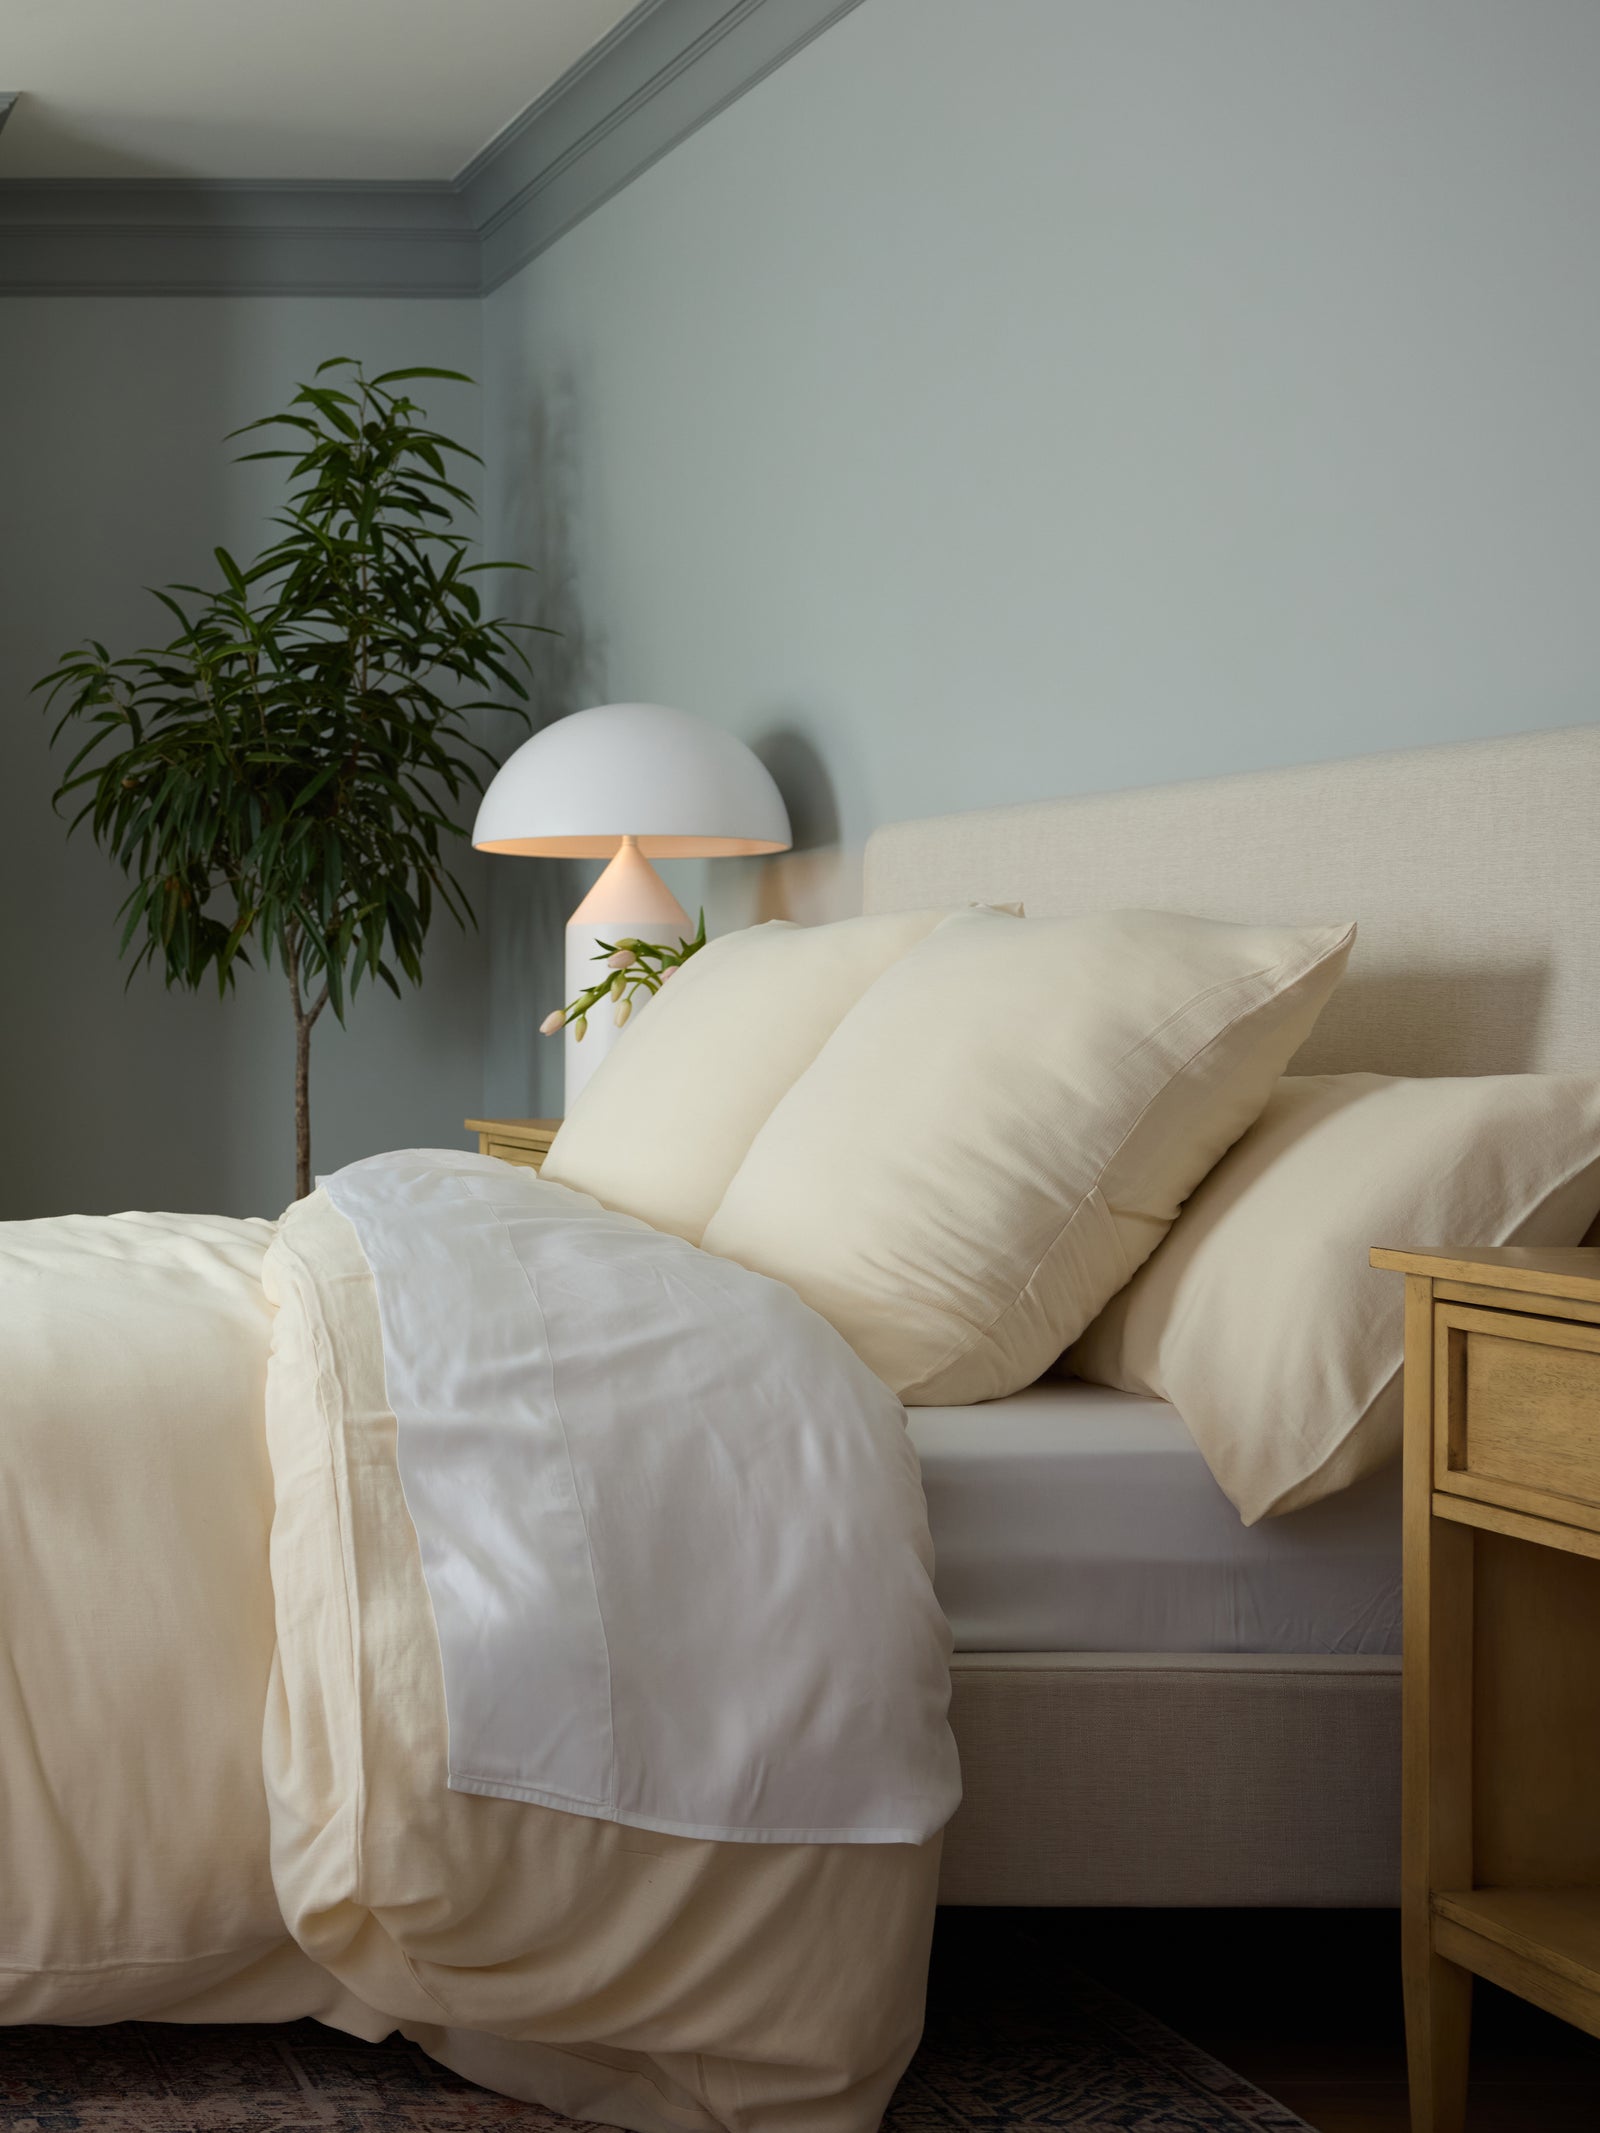 Buttermilk Aire Bamboo Shams. The shams are resting on a bed in a bedroom